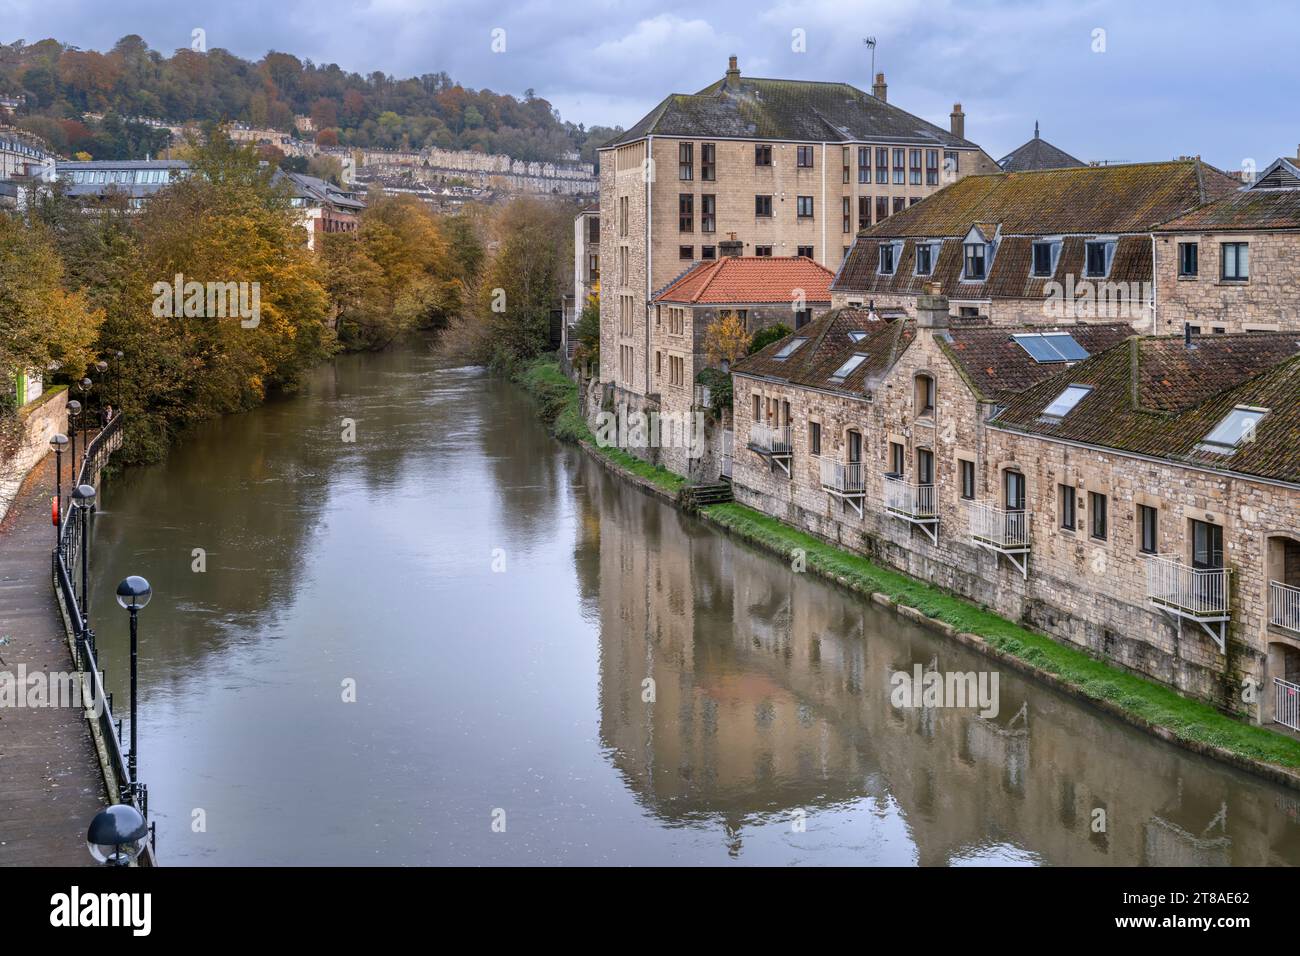 Looking towards Grove Street, the River Avon winds its way through the Georgian city of Bath in Somerset, England. Stock Photo